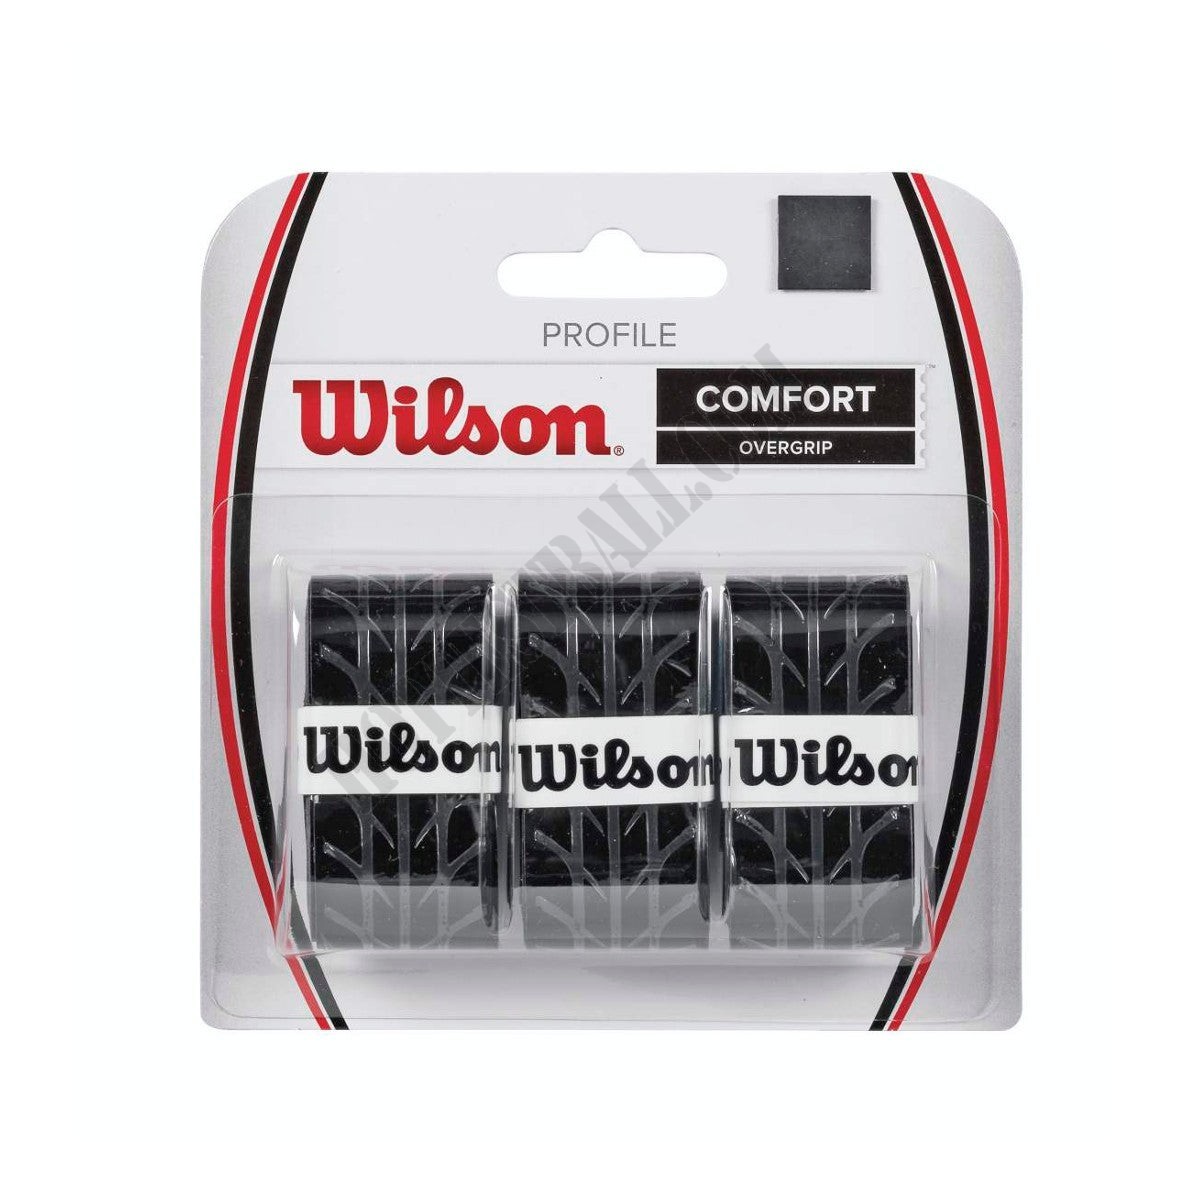 Profile Overgrip, 3 Pack - Wilson Discount Store - Profile Overgrip, 3 Pack - Wilson Discount Store